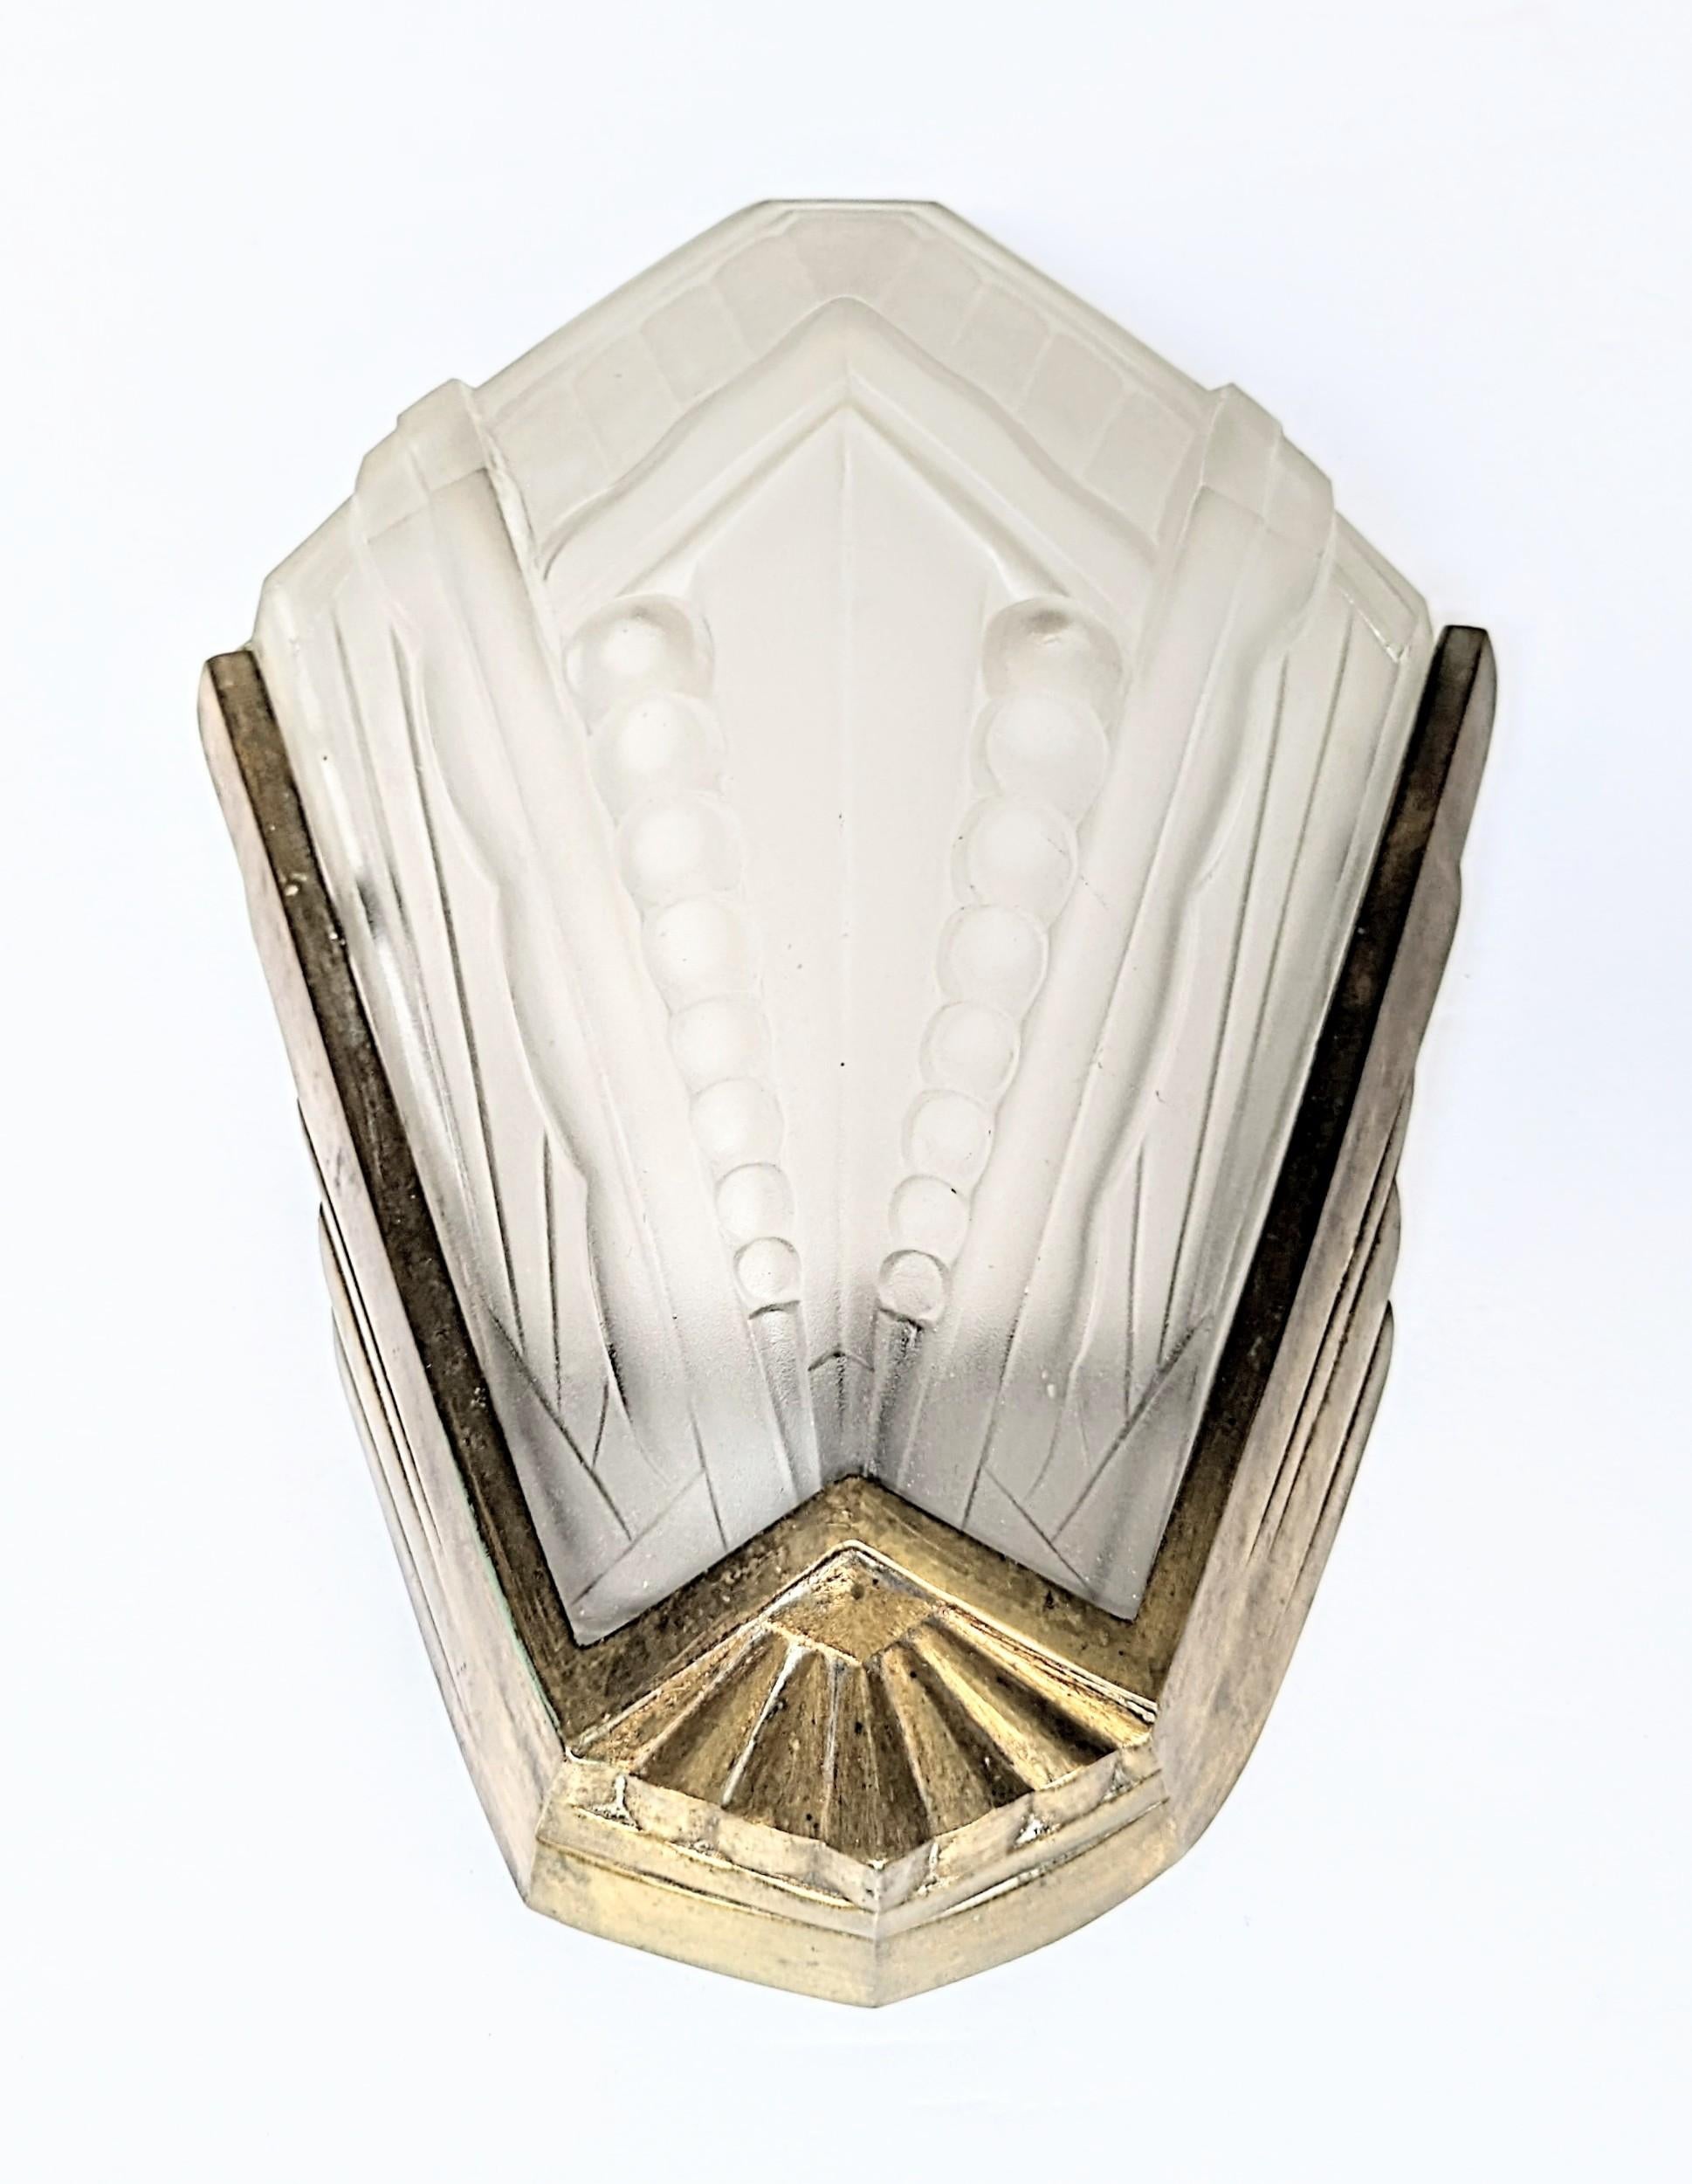 A pair of French Art Deco wall sconces were created by the French Master 